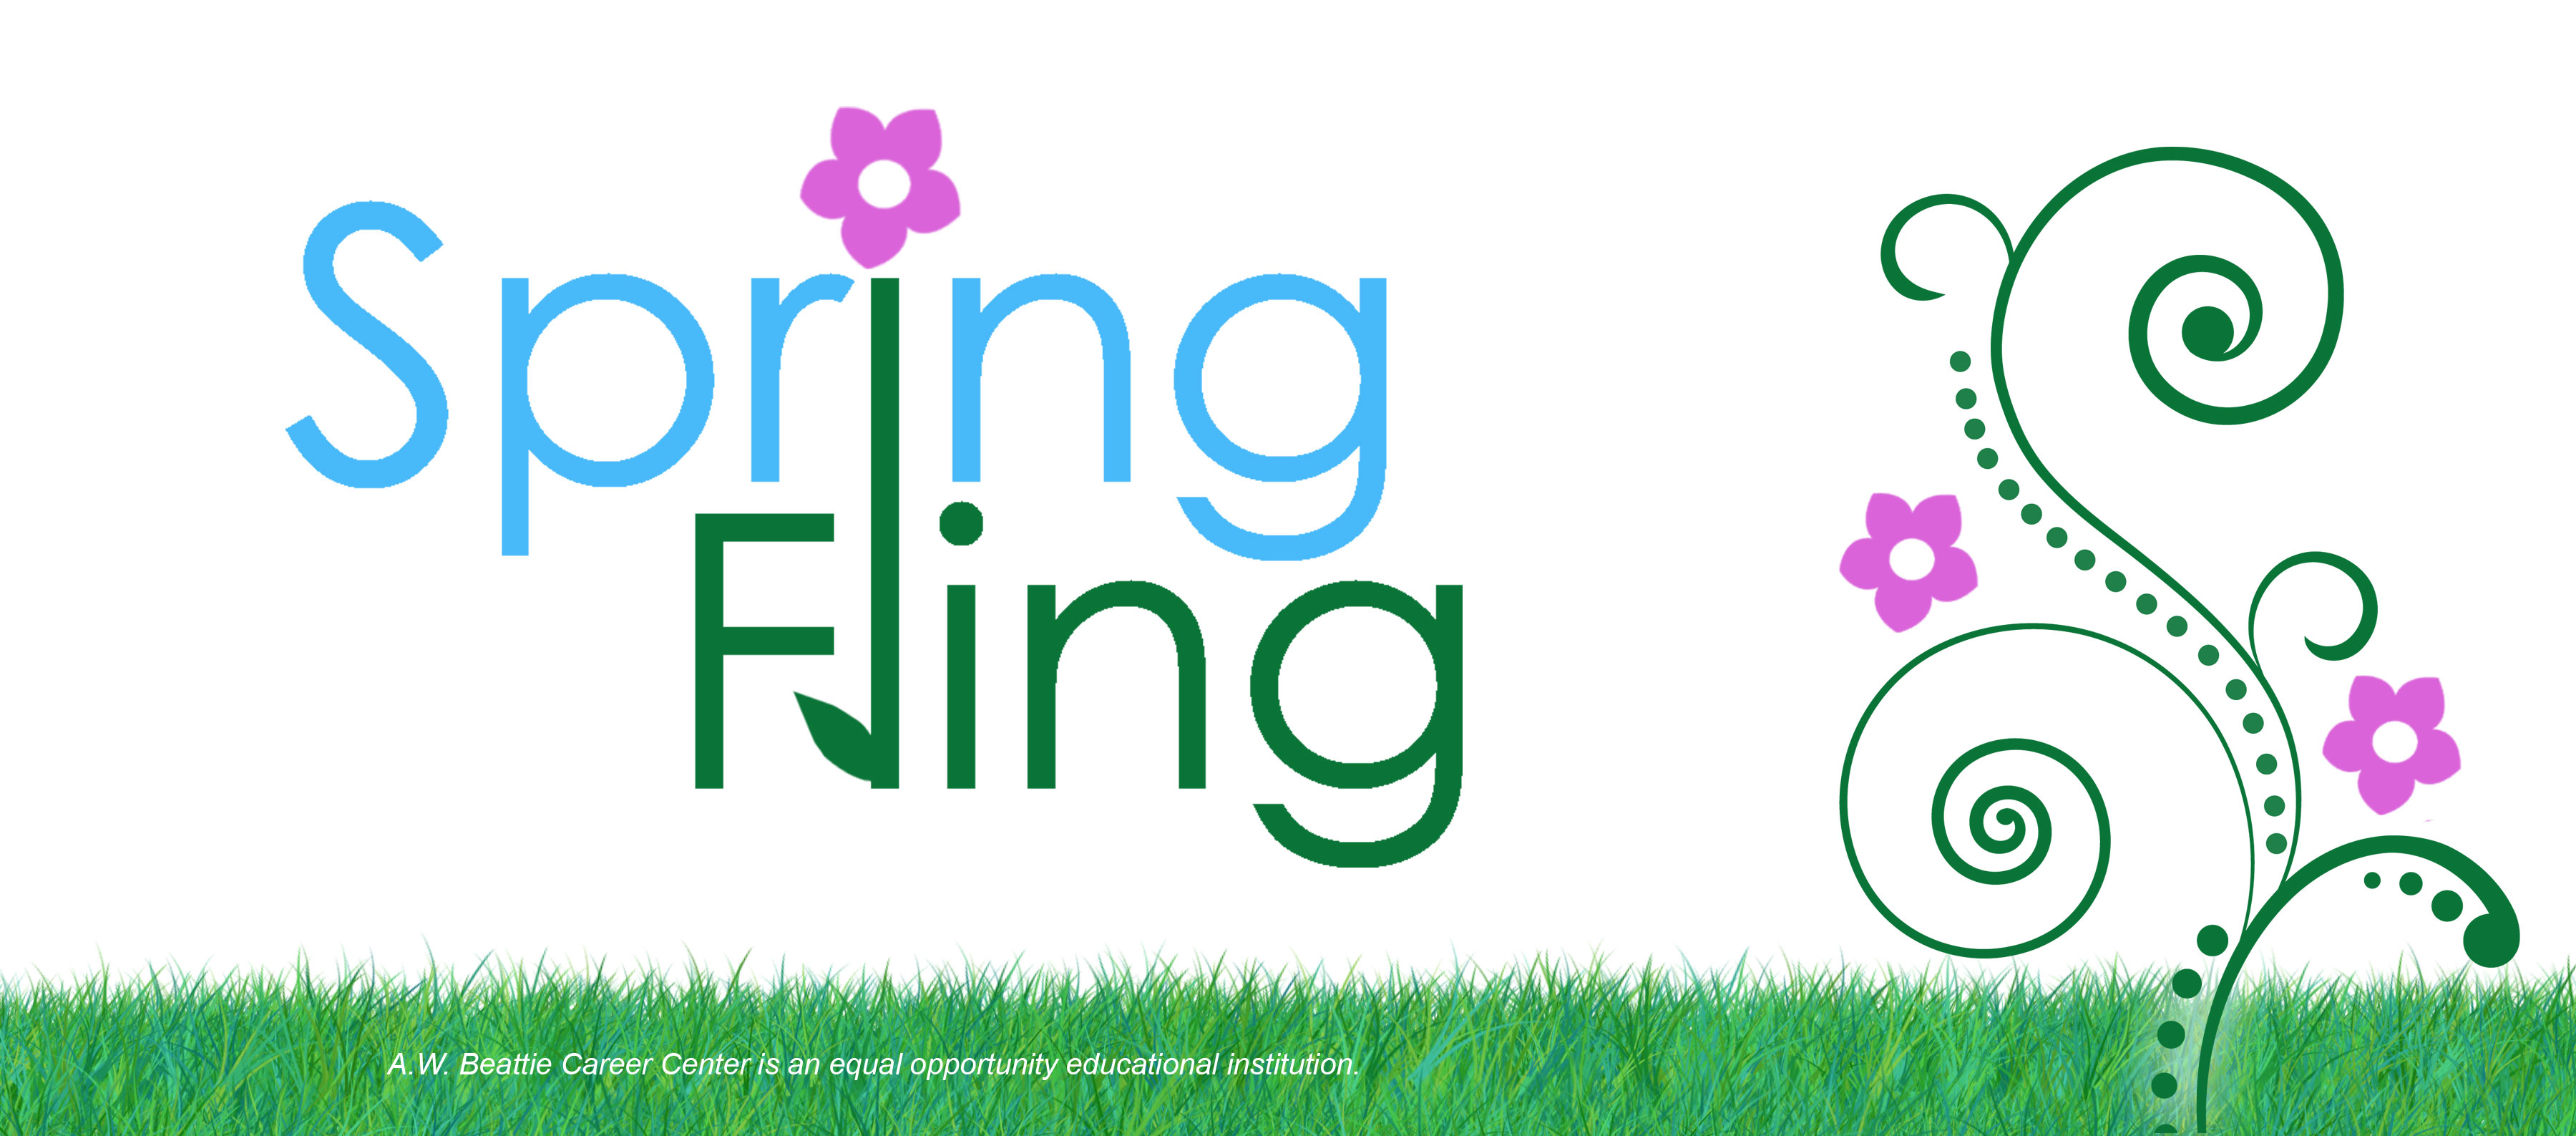 Free Spring Dinner Cliparts, Download Free Clip Art, Free ...